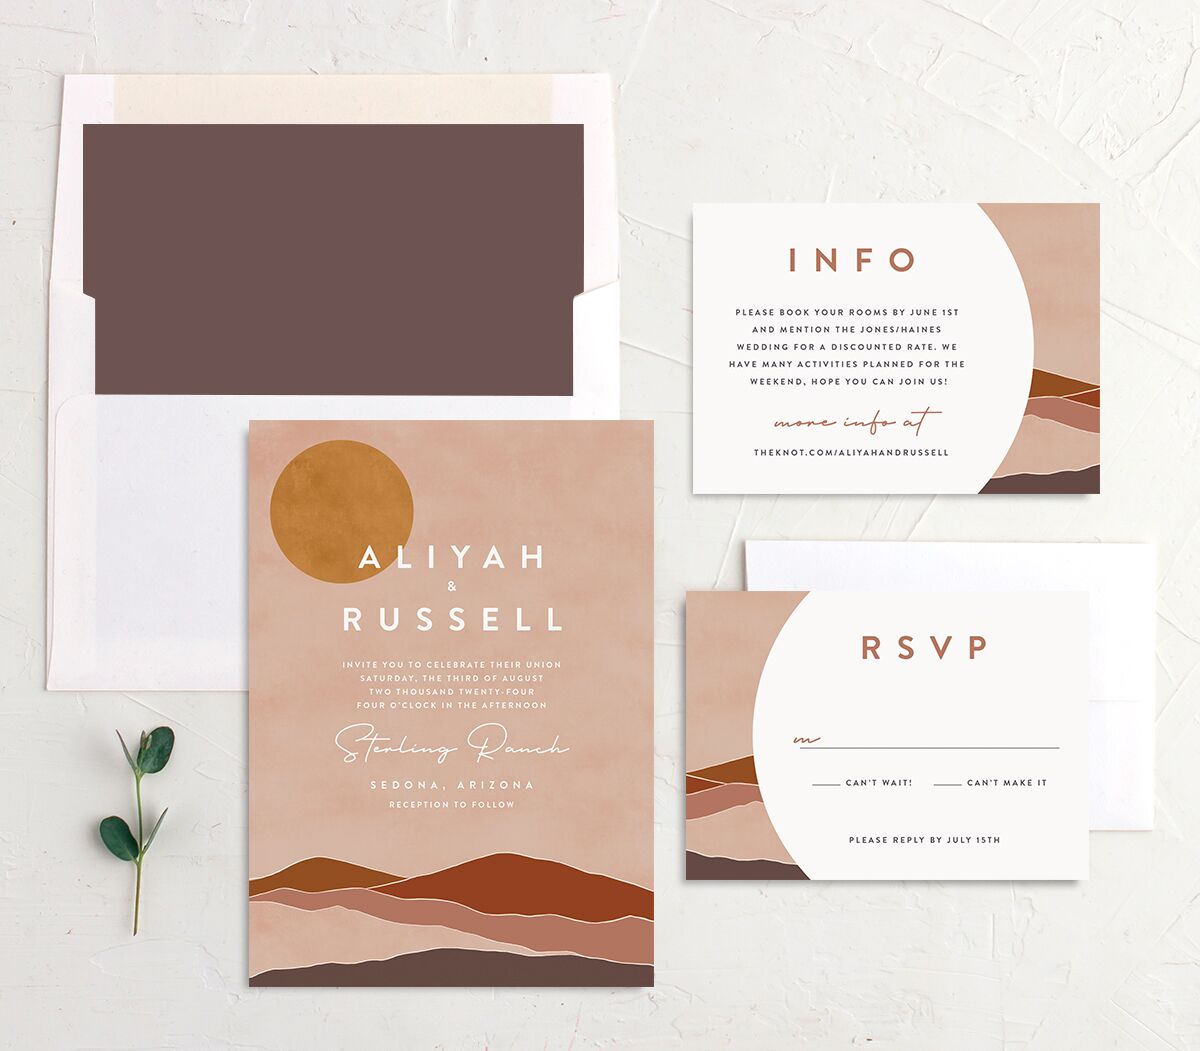 Abstract Hills Wedding Invitations suite in pink